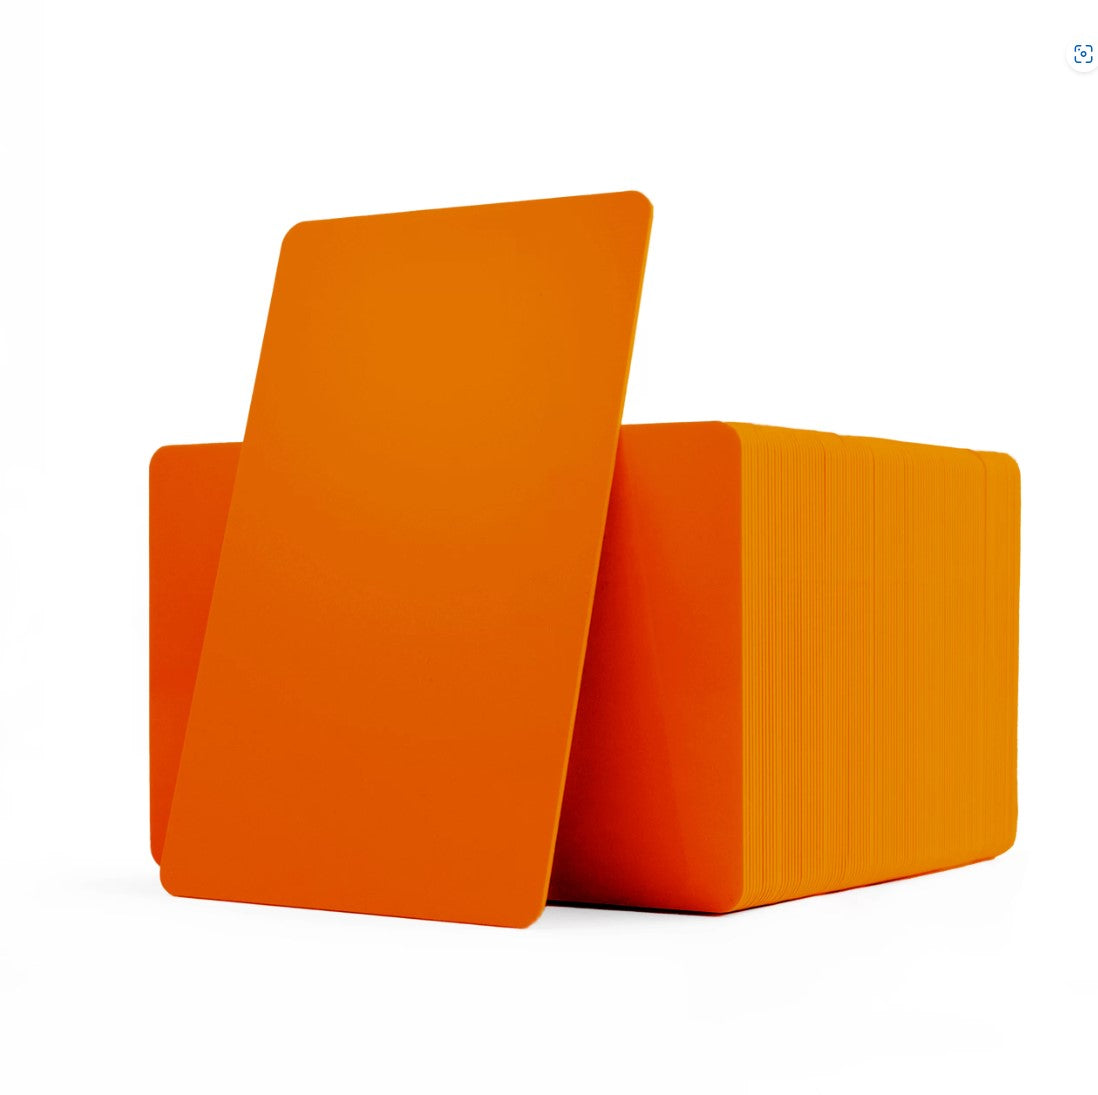 PVC CR80 Orange Coloured Cards With Solid Core Coloured Edges - 1 - 100